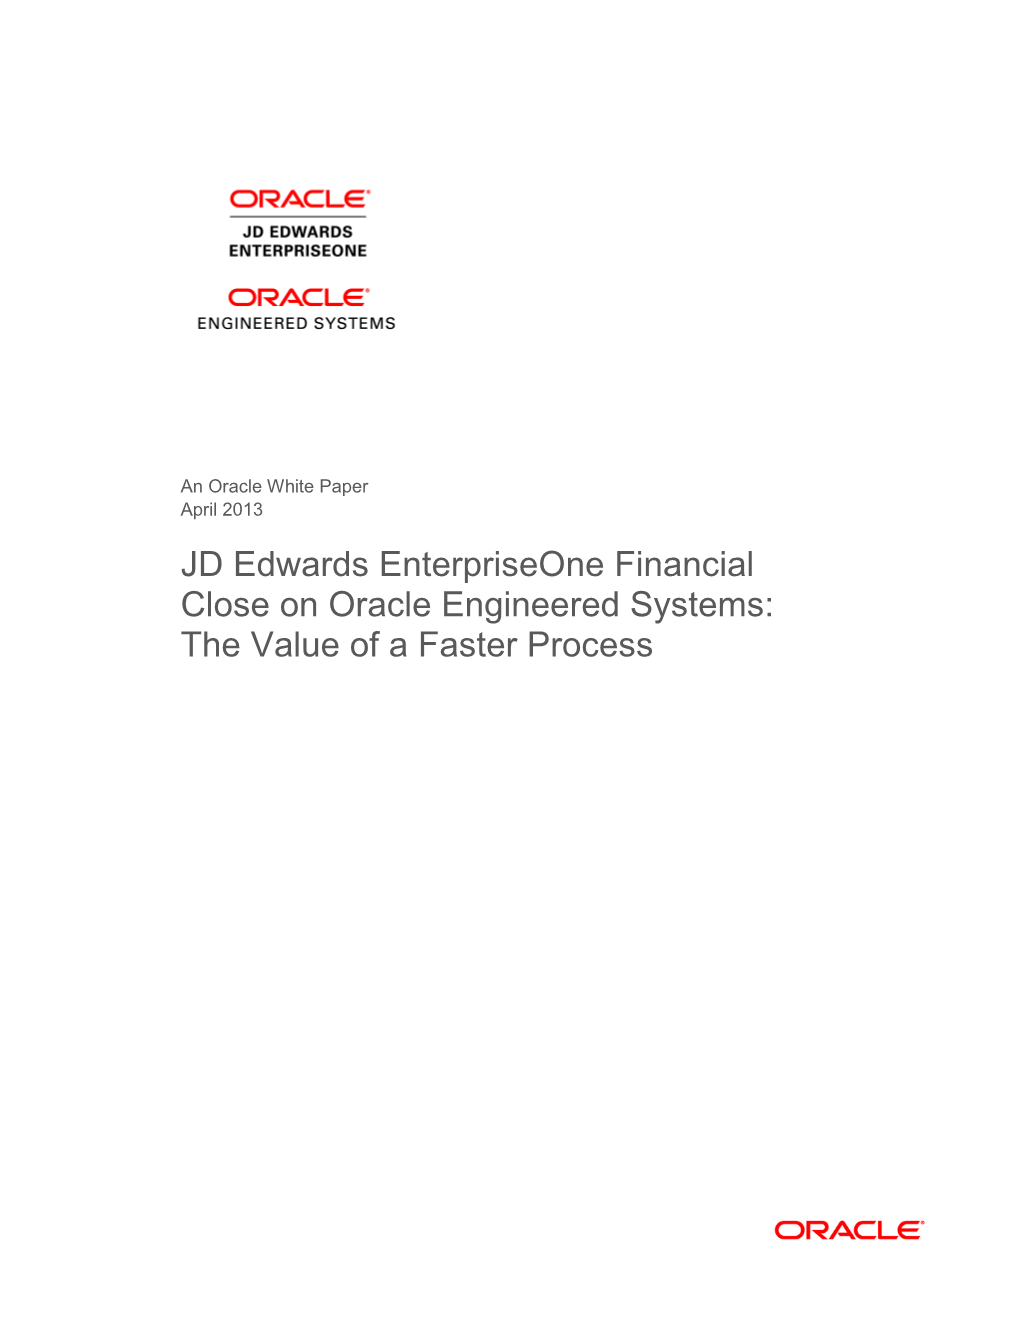 JD Edwards Enterpriseone Financial Close on Oracle Engineered Systems: the Value of a Faster Process